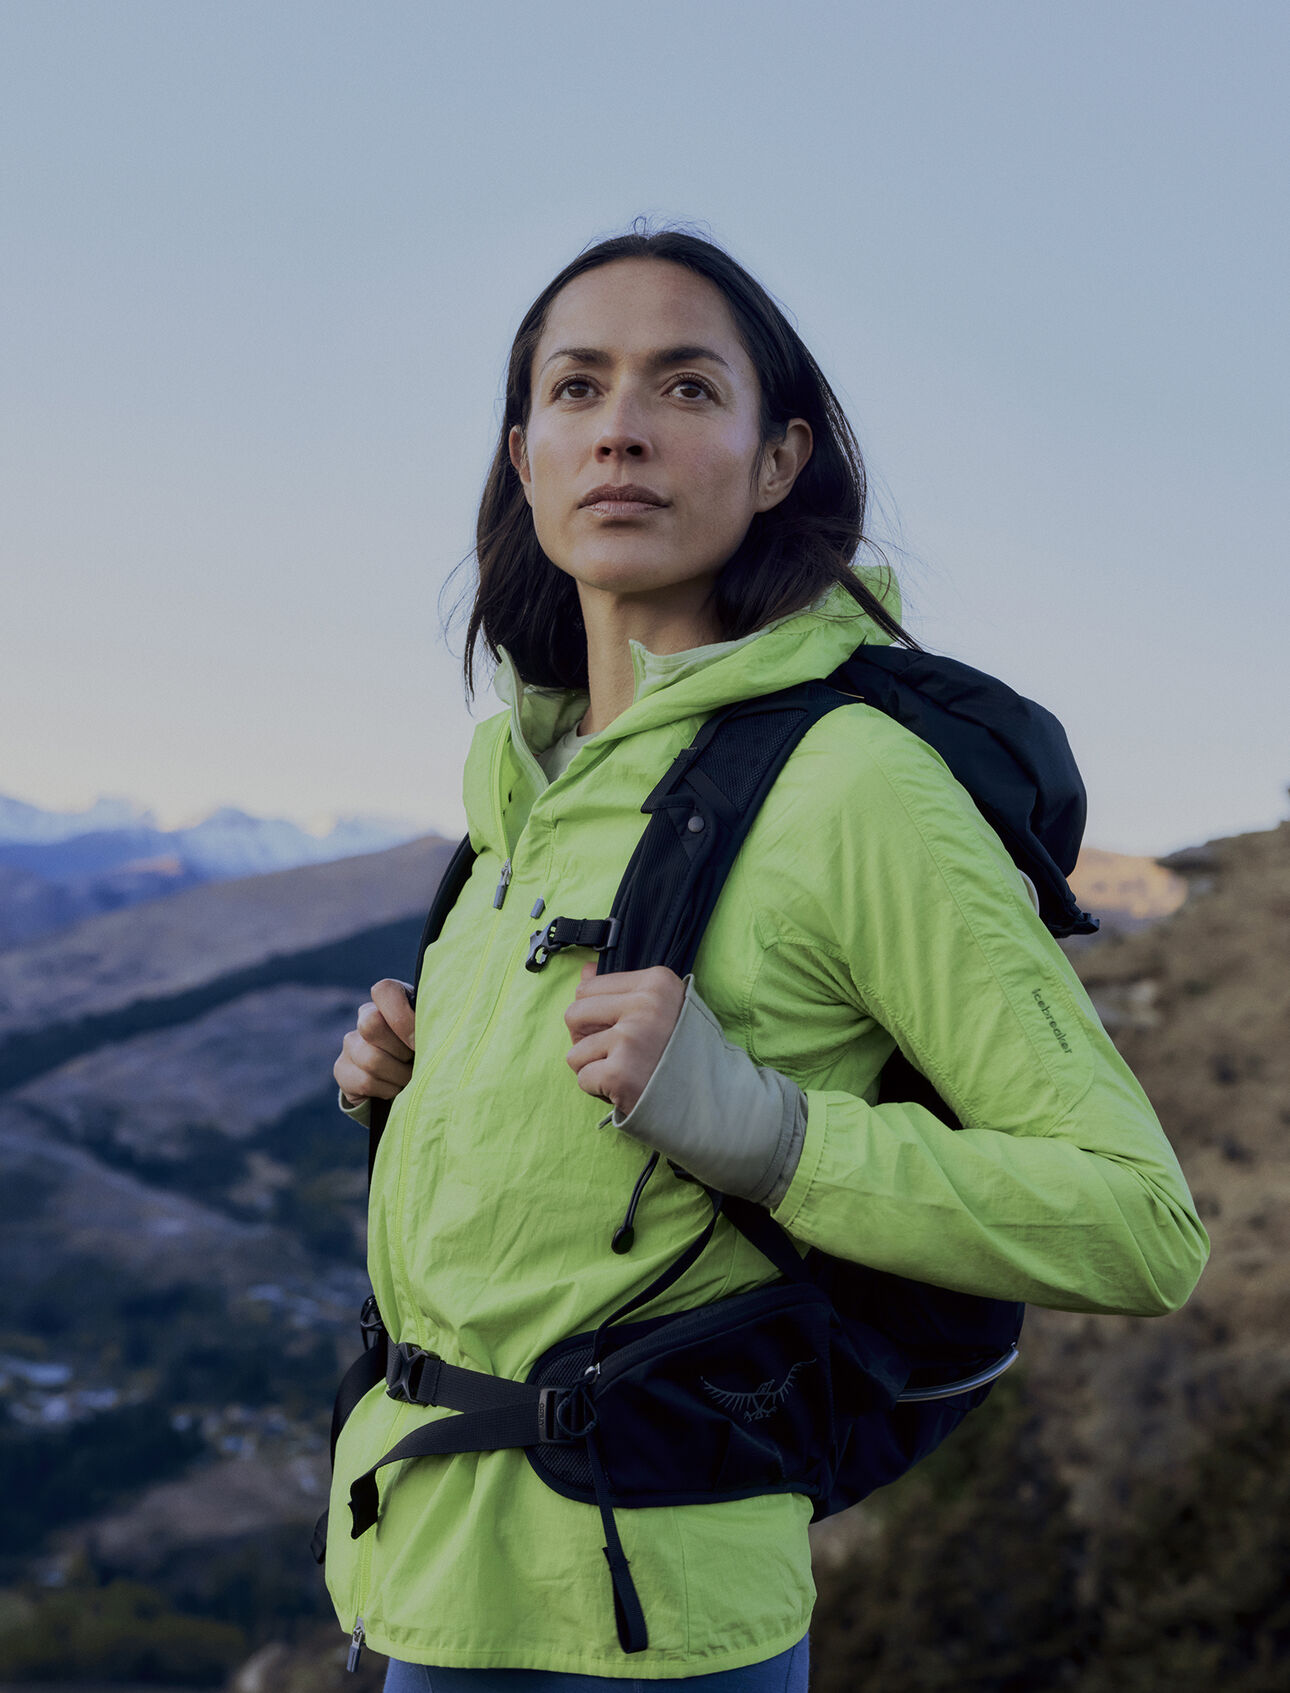 Womens Shell+™ Merino Blend  Cotton Windbreaker A lightweight layer that shields against the wind and light rain during active mountain adventures, the Shell+™ Cotton Windbreaker puts a natural spin on technical outerwear.